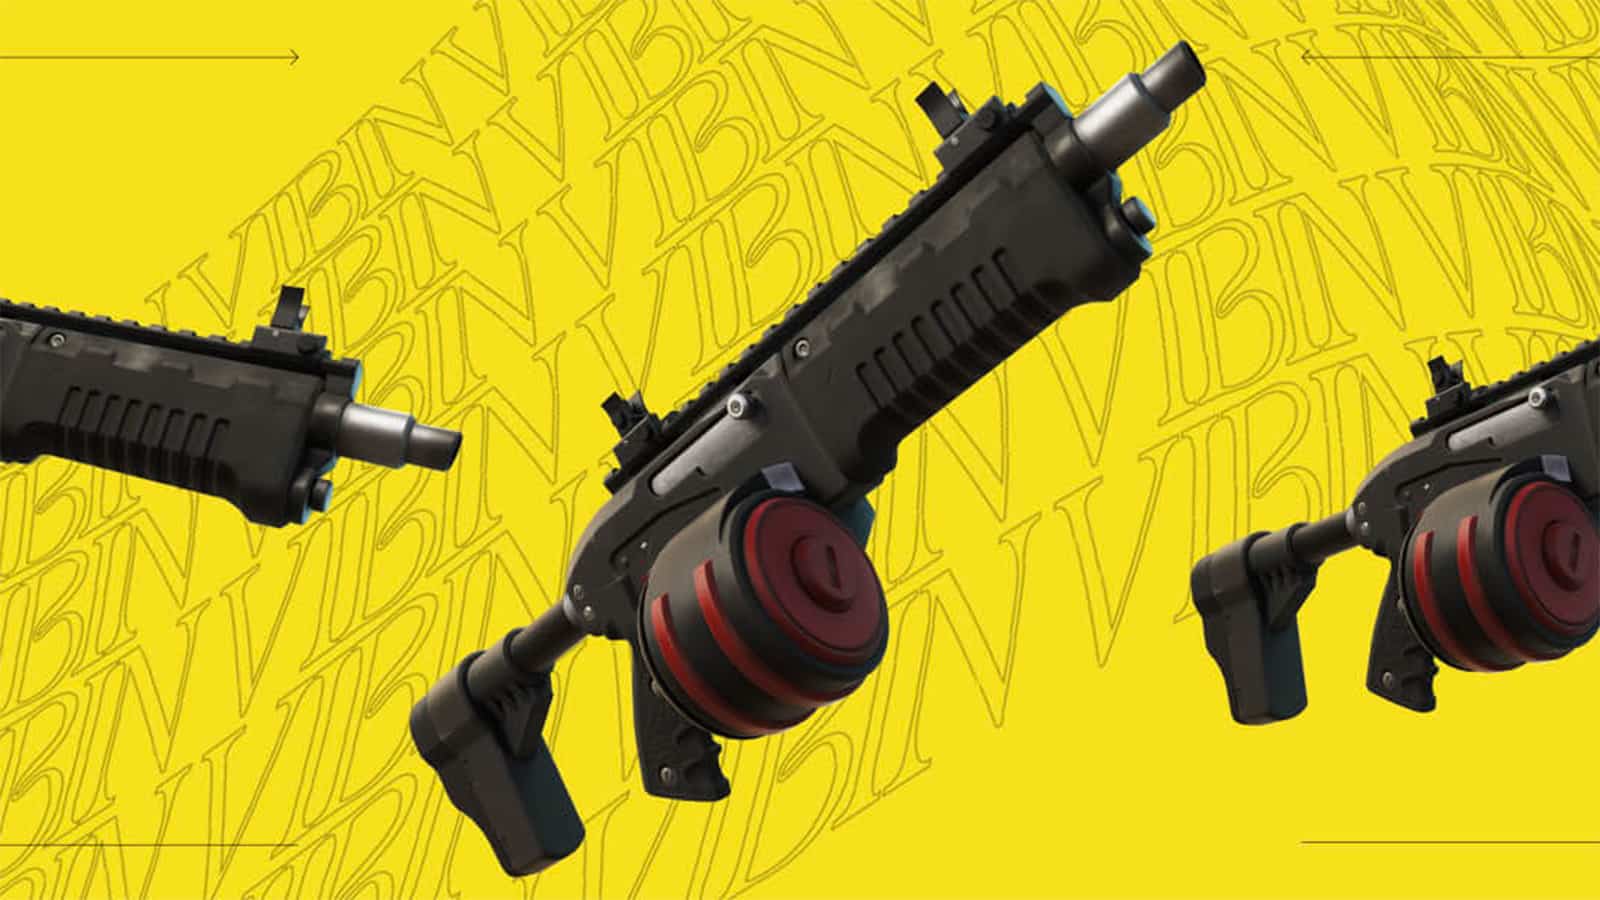 Charge SMG new weapon in Fortnite